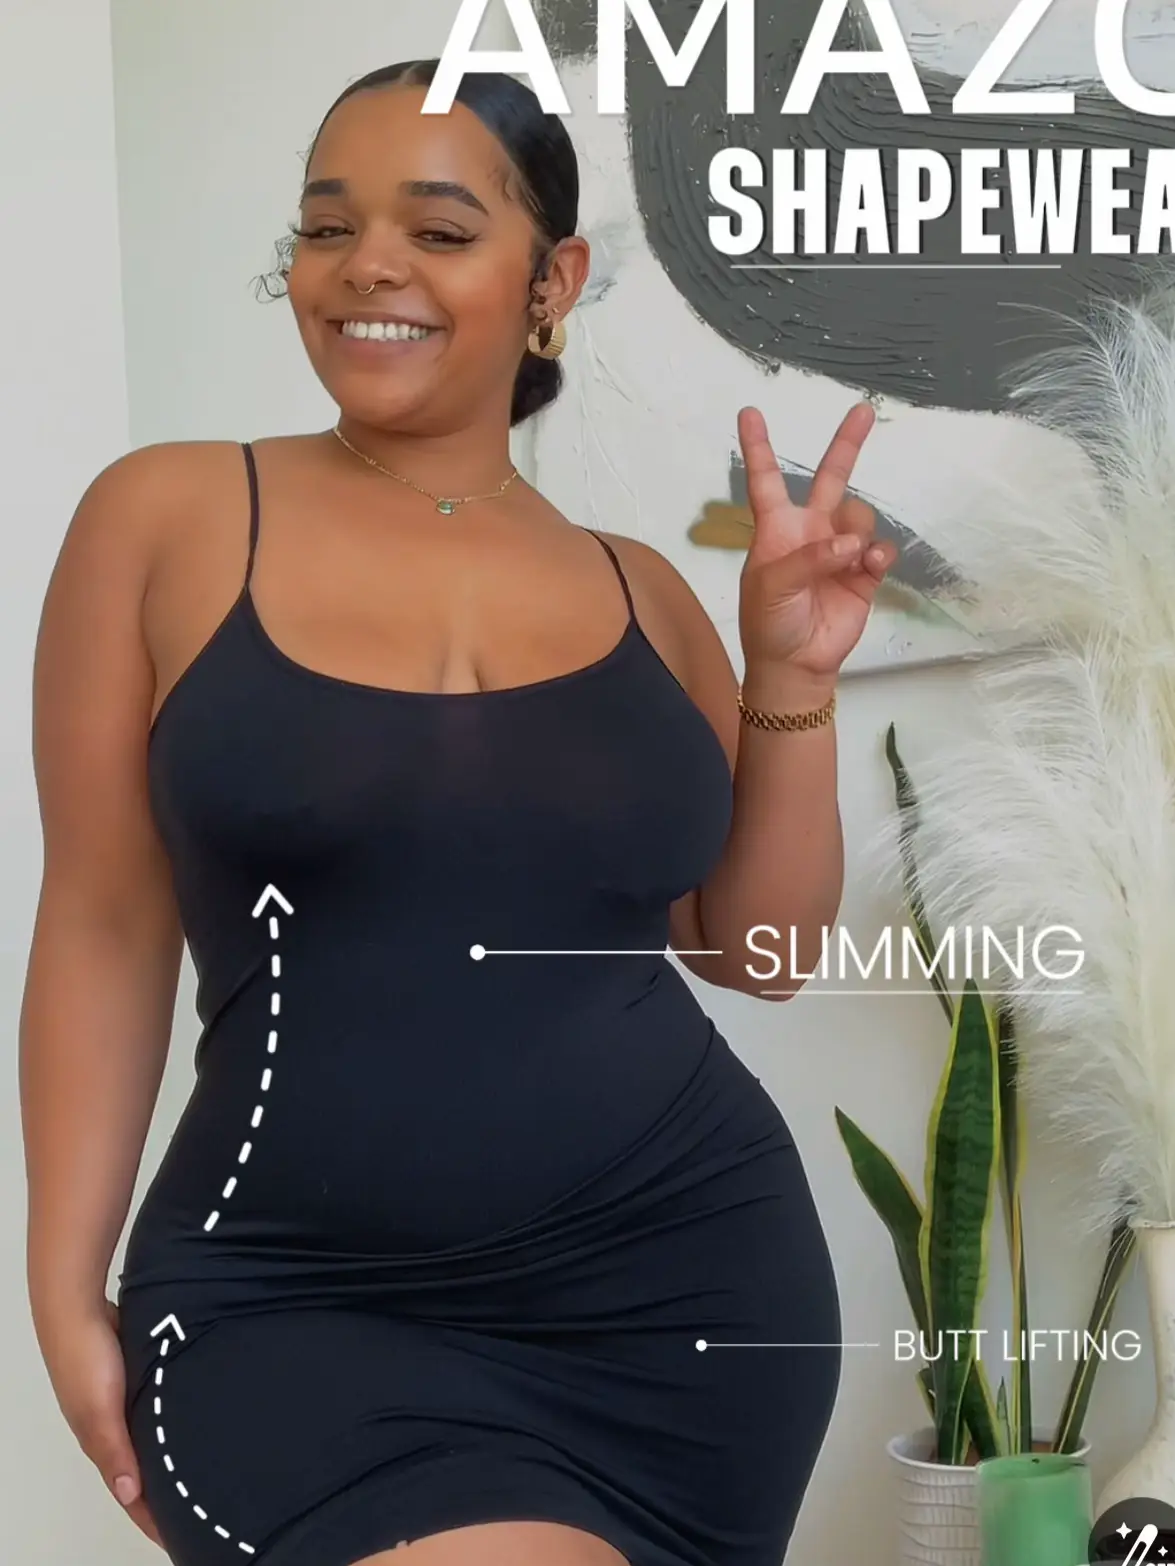 Before and after curve-enhancing shapewear. Link in bio 🛍️ #shapewear